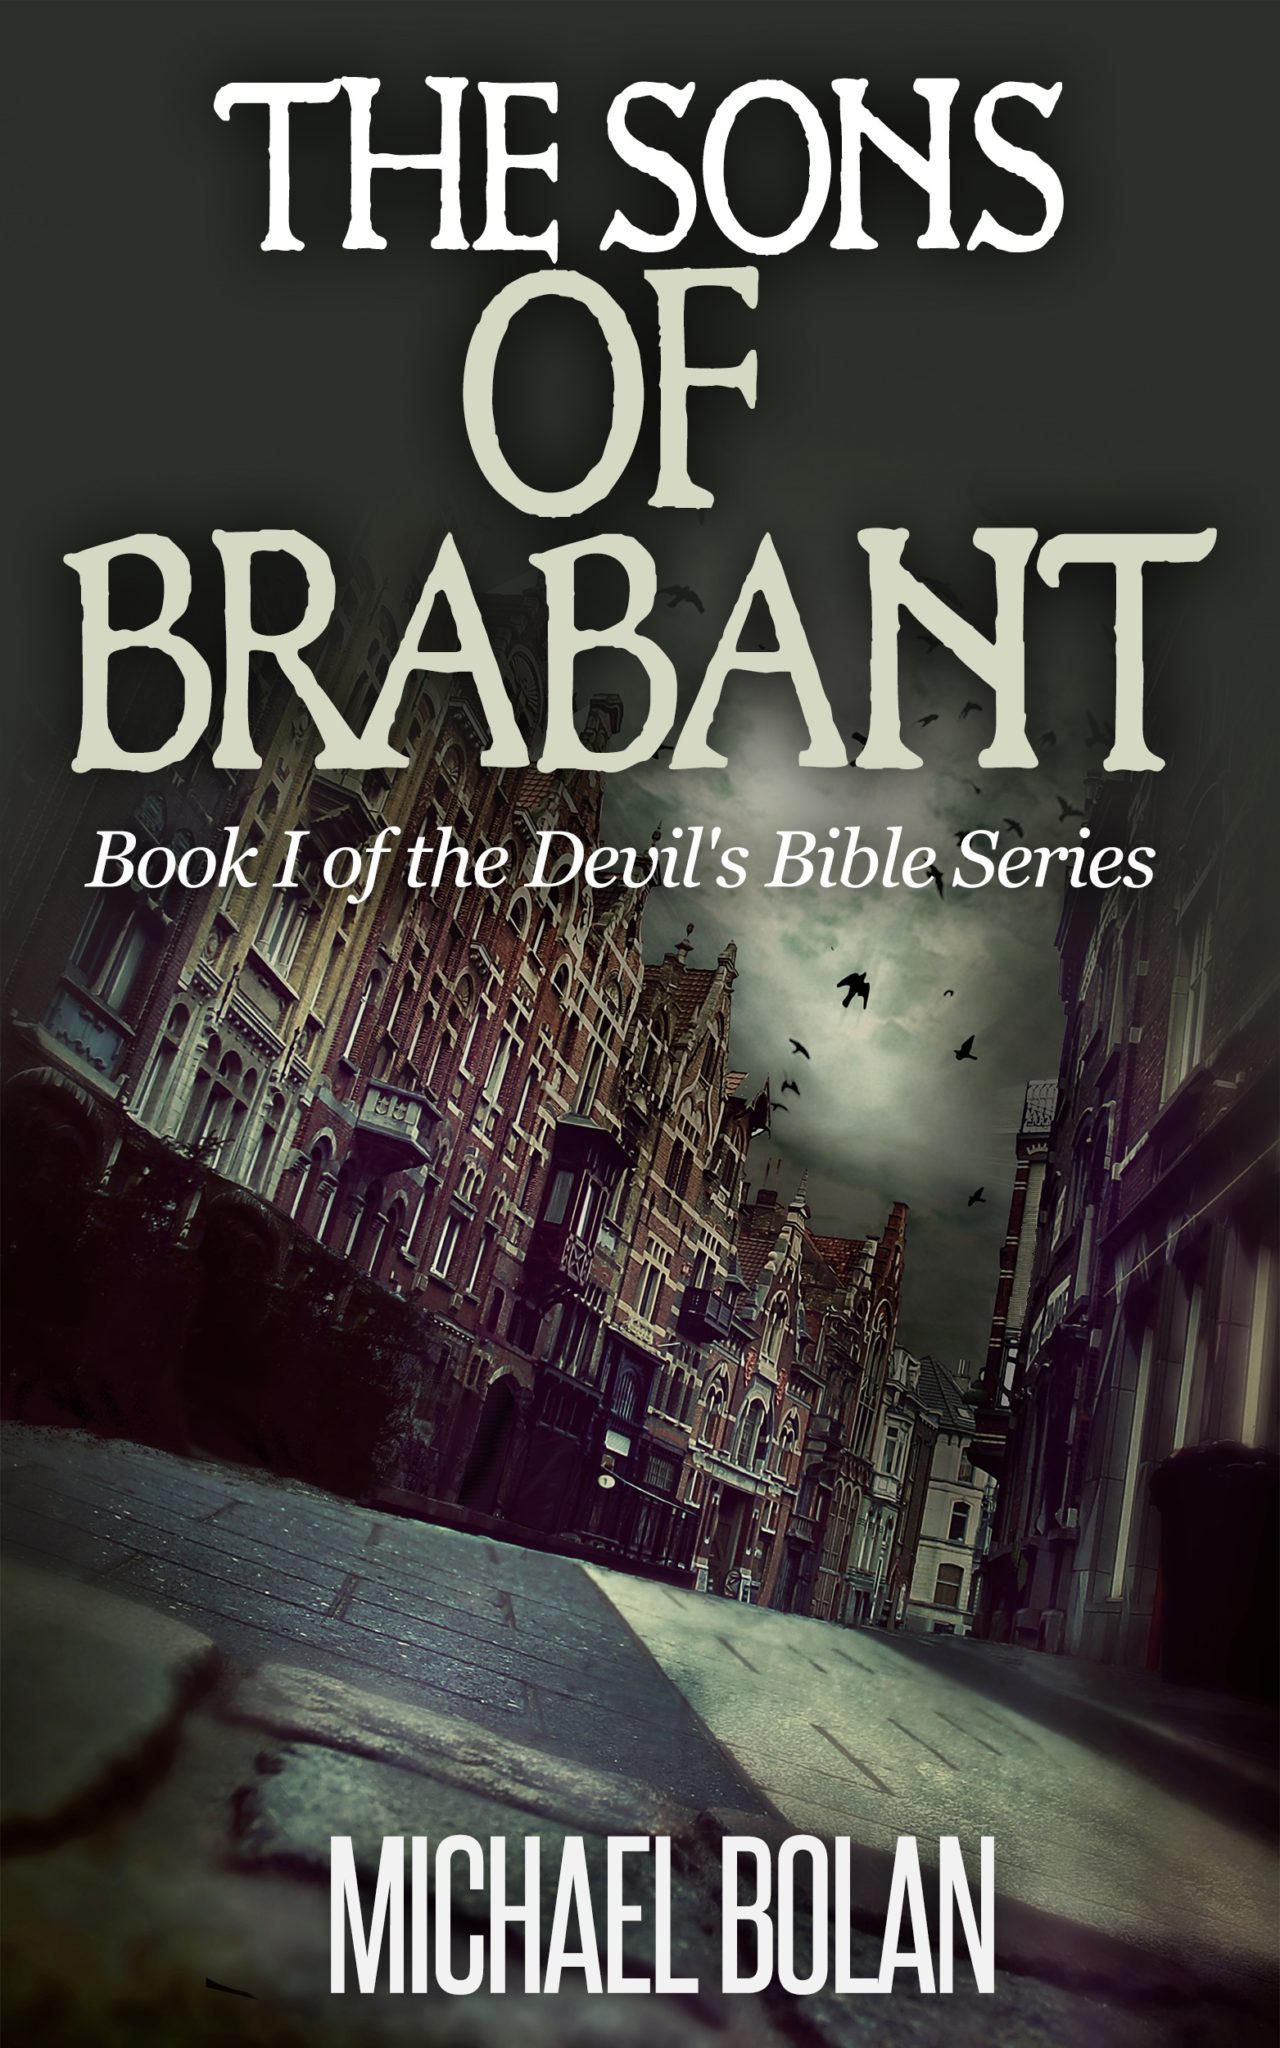 FREE: The Sons of Brabant by Michael Bolan